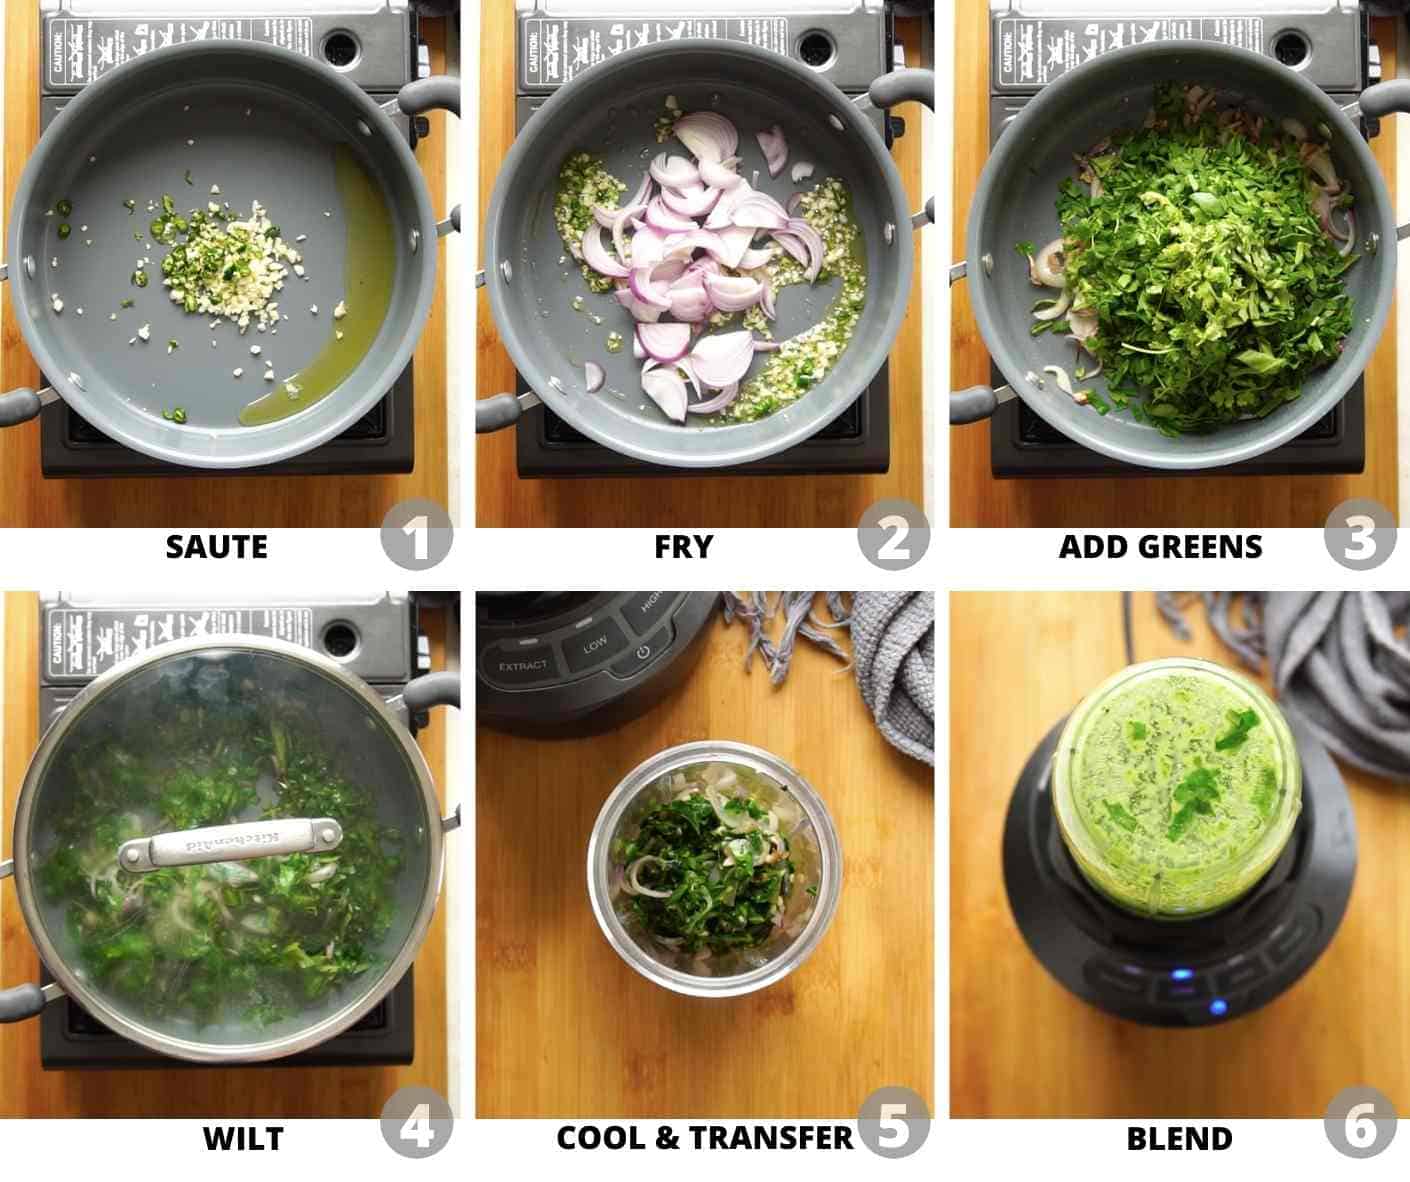 Step by step pictures showing how to make palak puree